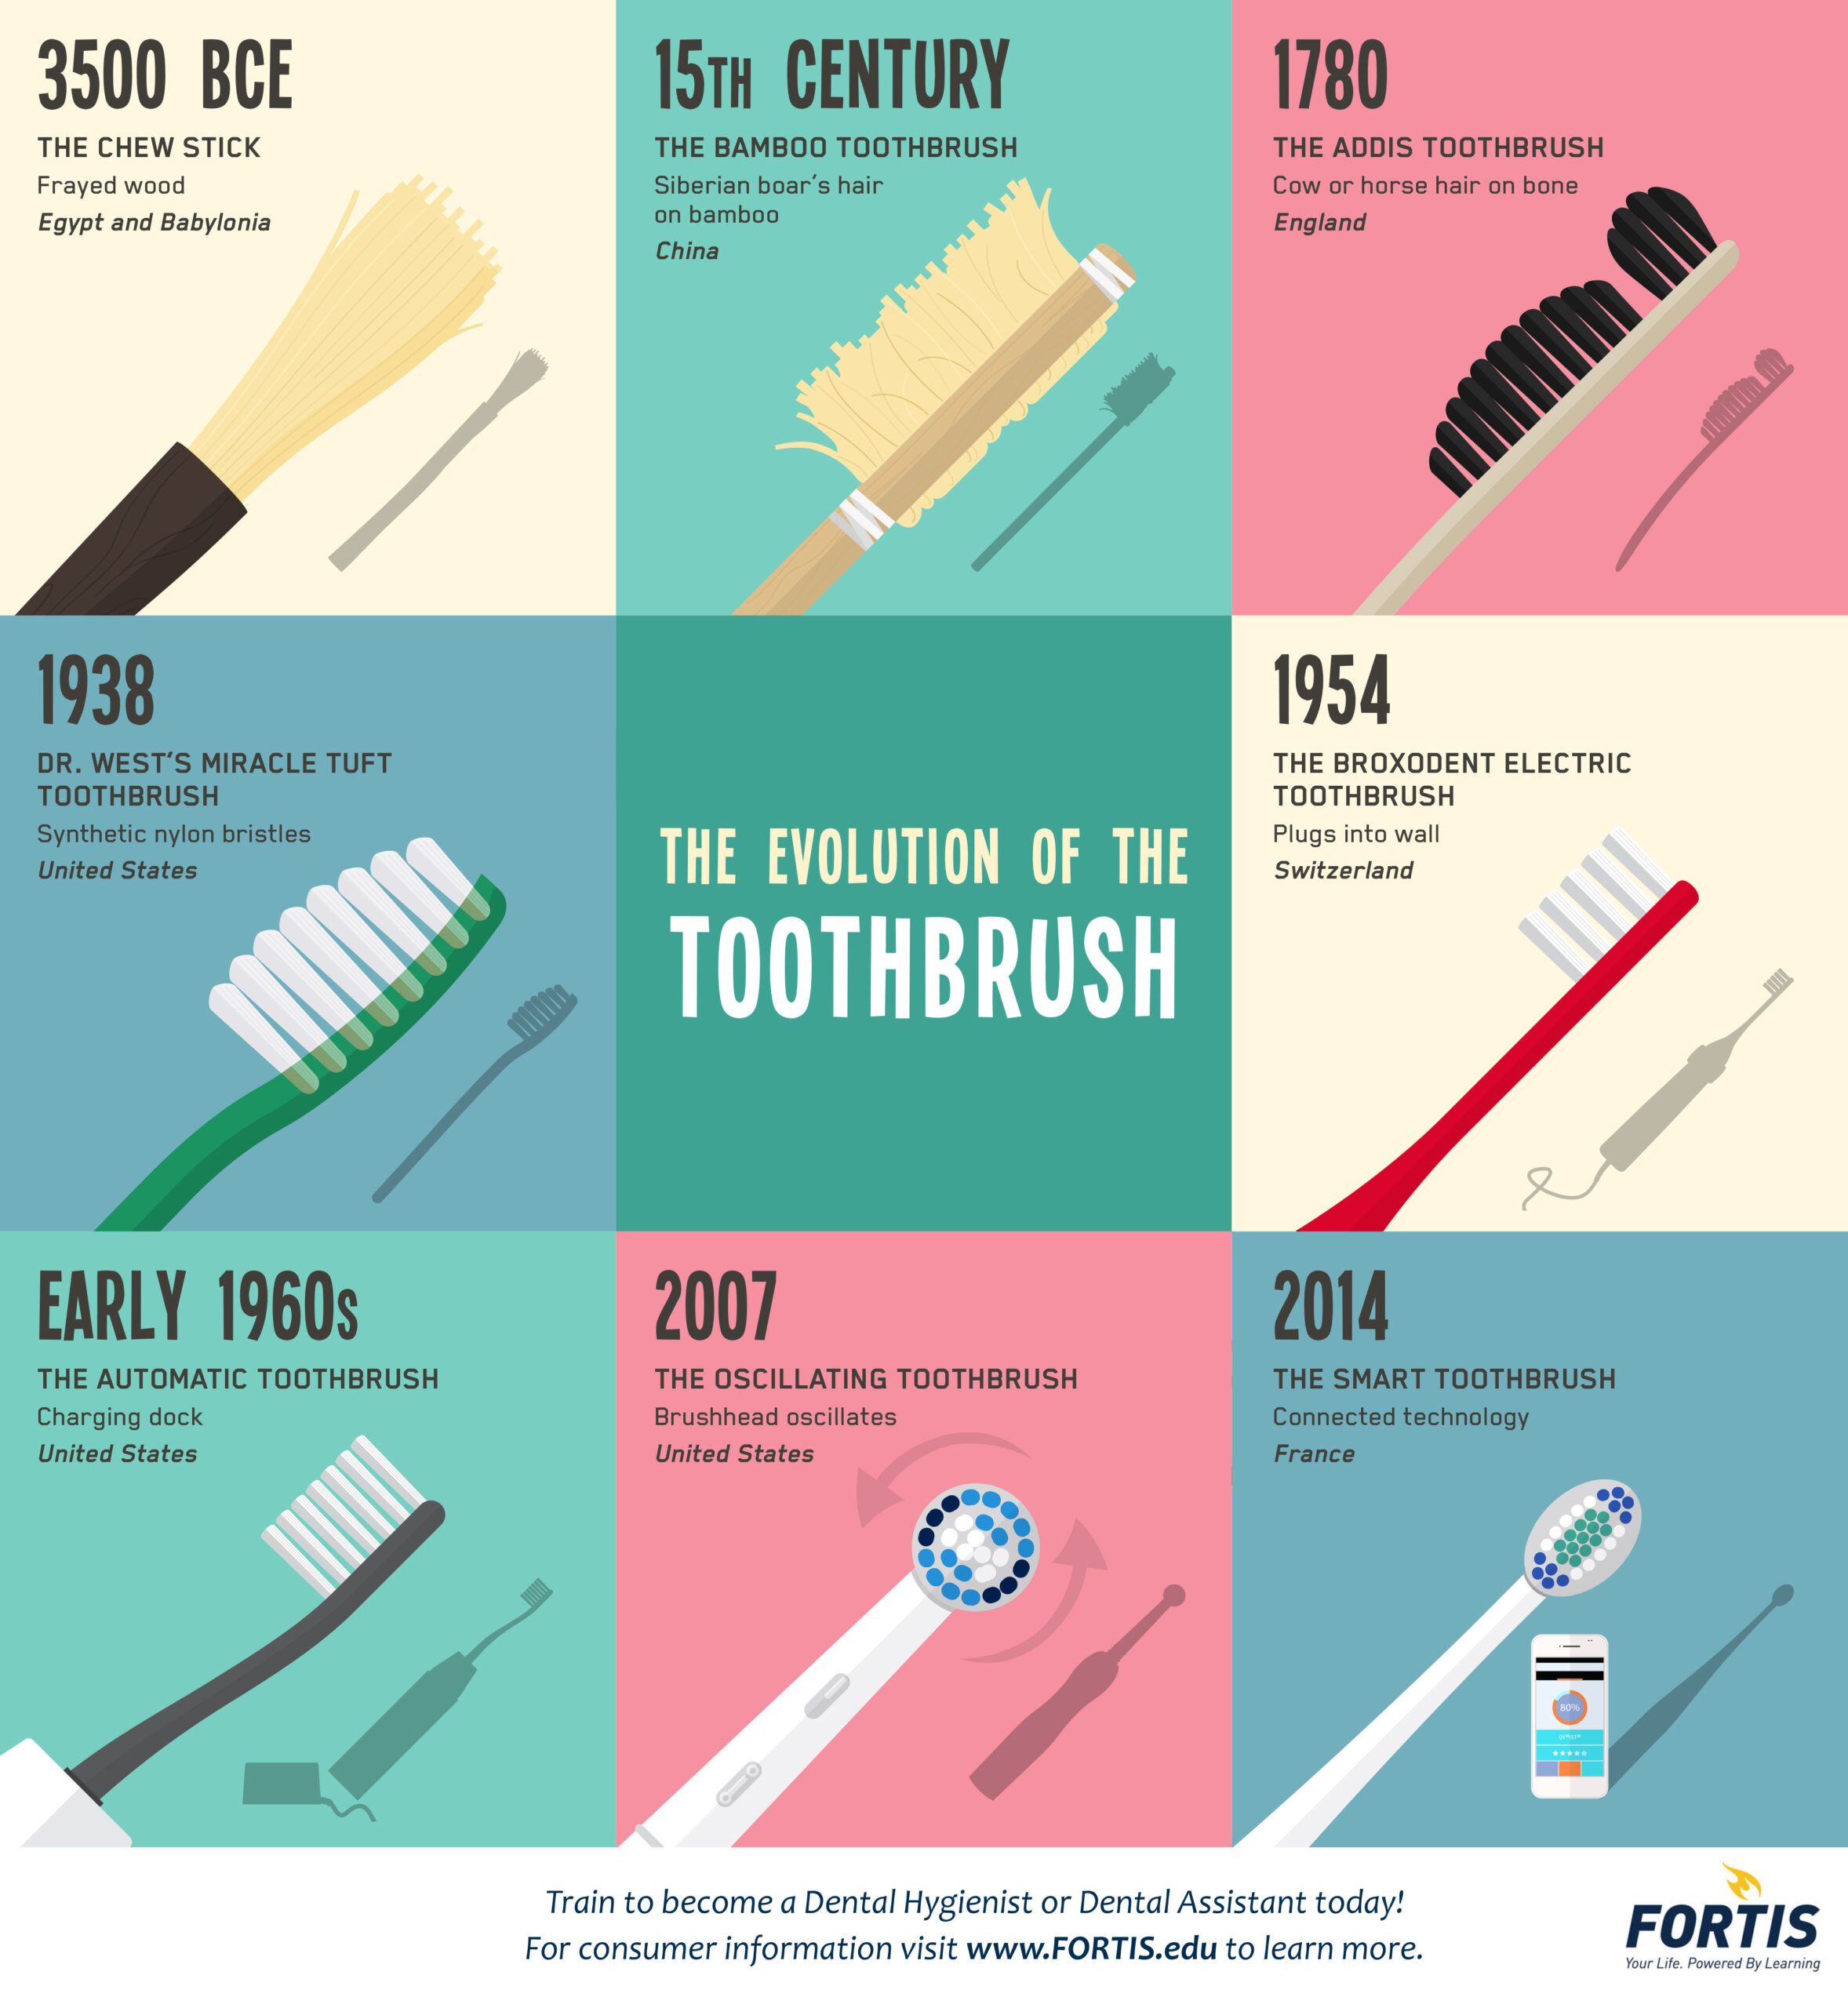 A Glimpse Into the 19th Century Toothbrush: Evolution, Design, and Use